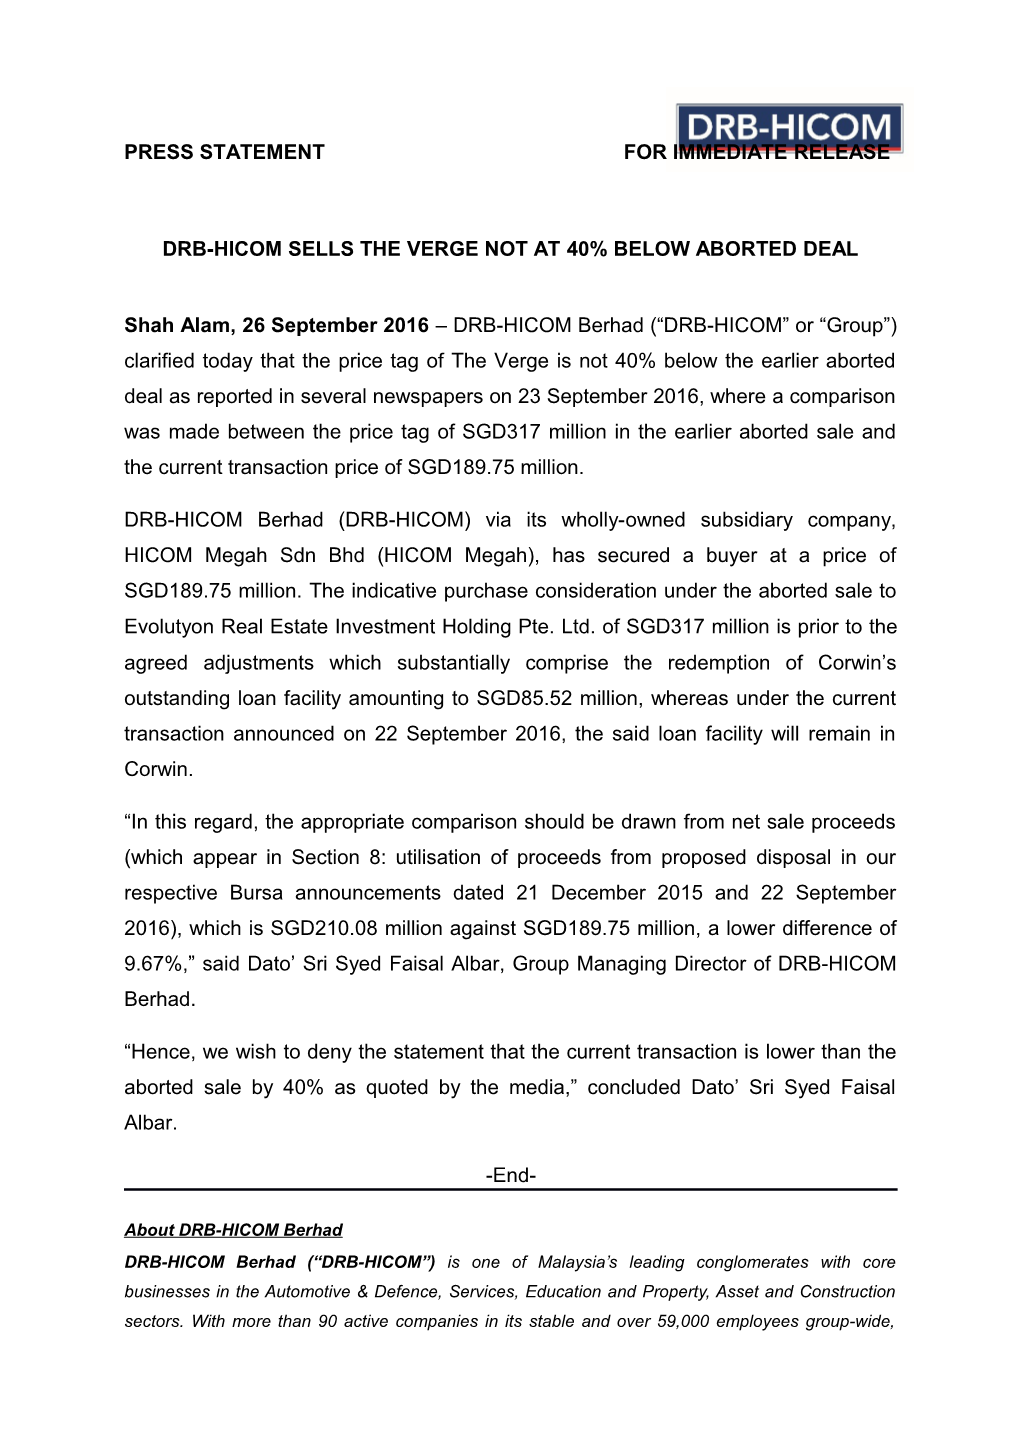 Drb-Hicom Sells the Verge Not at 40% Below Aborted Deal